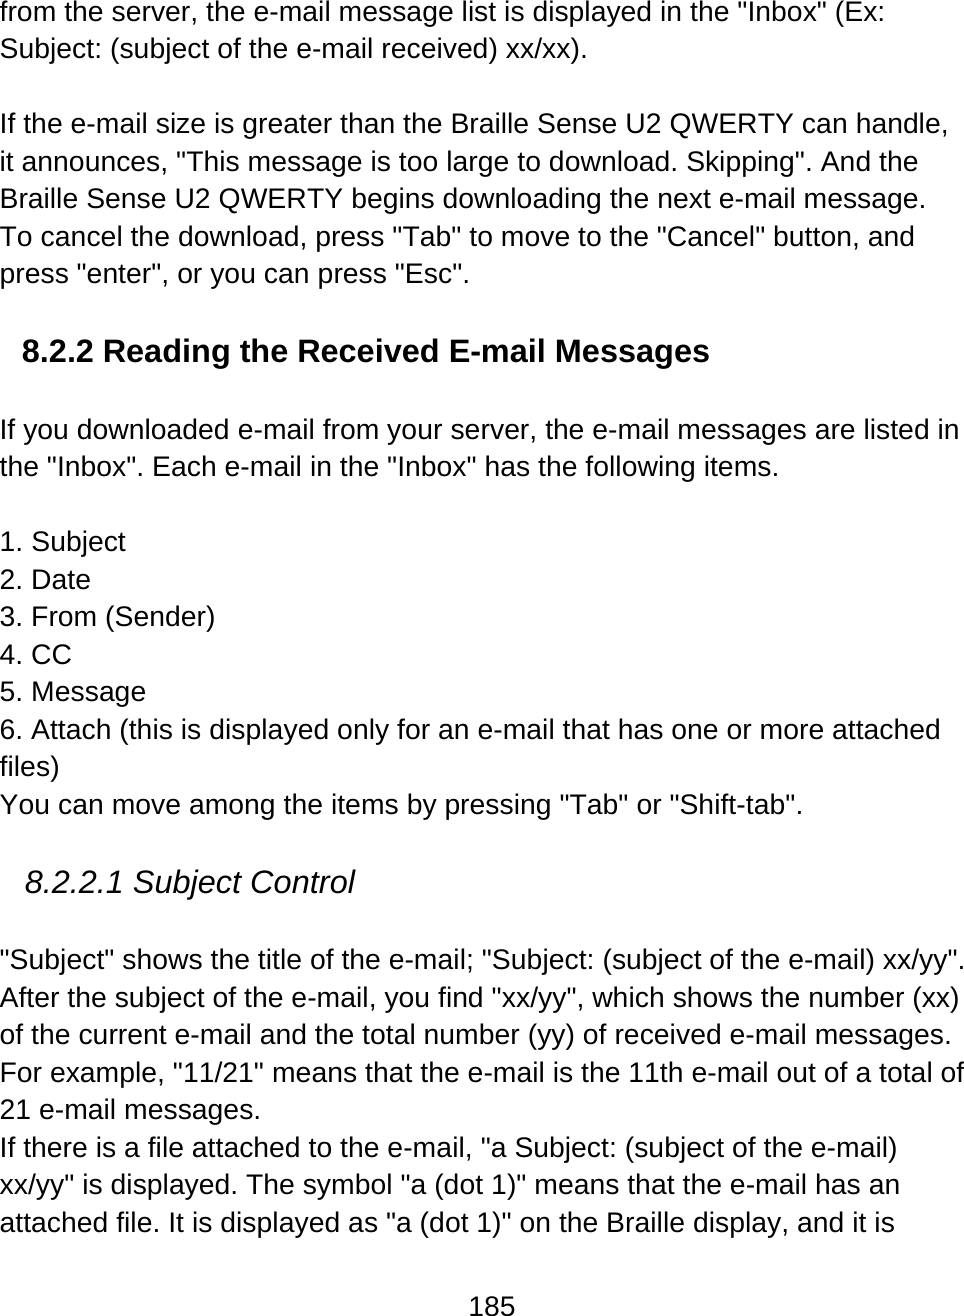 185  from the server, the e-mail message list is displayed in the &quot;Inbox&quot; (Ex: Subject: (subject of the e-mail received) xx/xx).  If the e-mail size is greater than the Braille Sense U2 QWERTY can handle, it announces, &quot;This message is too large to download. Skipping&quot;. And the Braille Sense U2 QWERTY begins downloading the next e-mail message.  To cancel the download, press &quot;Tab&quot; to move to the &quot;Cancel&quot; button, and press &quot;enter&quot;, or you can press &quot;Esc&quot;.  8.2.2 Reading the Received E-mail Messages  If you downloaded e-mail from your server, the e-mail messages are listed in the &quot;Inbox&quot;. Each e-mail in the &quot;Inbox&quot; has the following items.  1. Subject 2. Date 3. From (Sender) 4. CC 5. Message 6. Attach (this is displayed only for an e-mail that has one or more attached files) You can move among the items by pressing &quot;Tab&quot; or &quot;Shift-tab&quot;.   8.2.2.1 Subject Control  &quot;Subject&quot; shows the title of the e-mail; &quot;Subject: (subject of the e-mail) xx/yy&quot;. After the subject of the e-mail, you find &quot;xx/yy&quot;, which shows the number (xx) of the current e-mail and the total number (yy) of received e-mail messages. For example, &quot;11/21&quot; means that the e-mail is the 11th e-mail out of a total of 21 e-mail messages. If there is a file attached to the e-mail, &quot;a Subject: (subject of the e-mail) xx/yy&quot; is displayed. The symbol &quot;a (dot 1)&quot; means that the e-mail has an attached file. It is displayed as &quot;a (dot 1)&quot; on the Braille display, and it is 